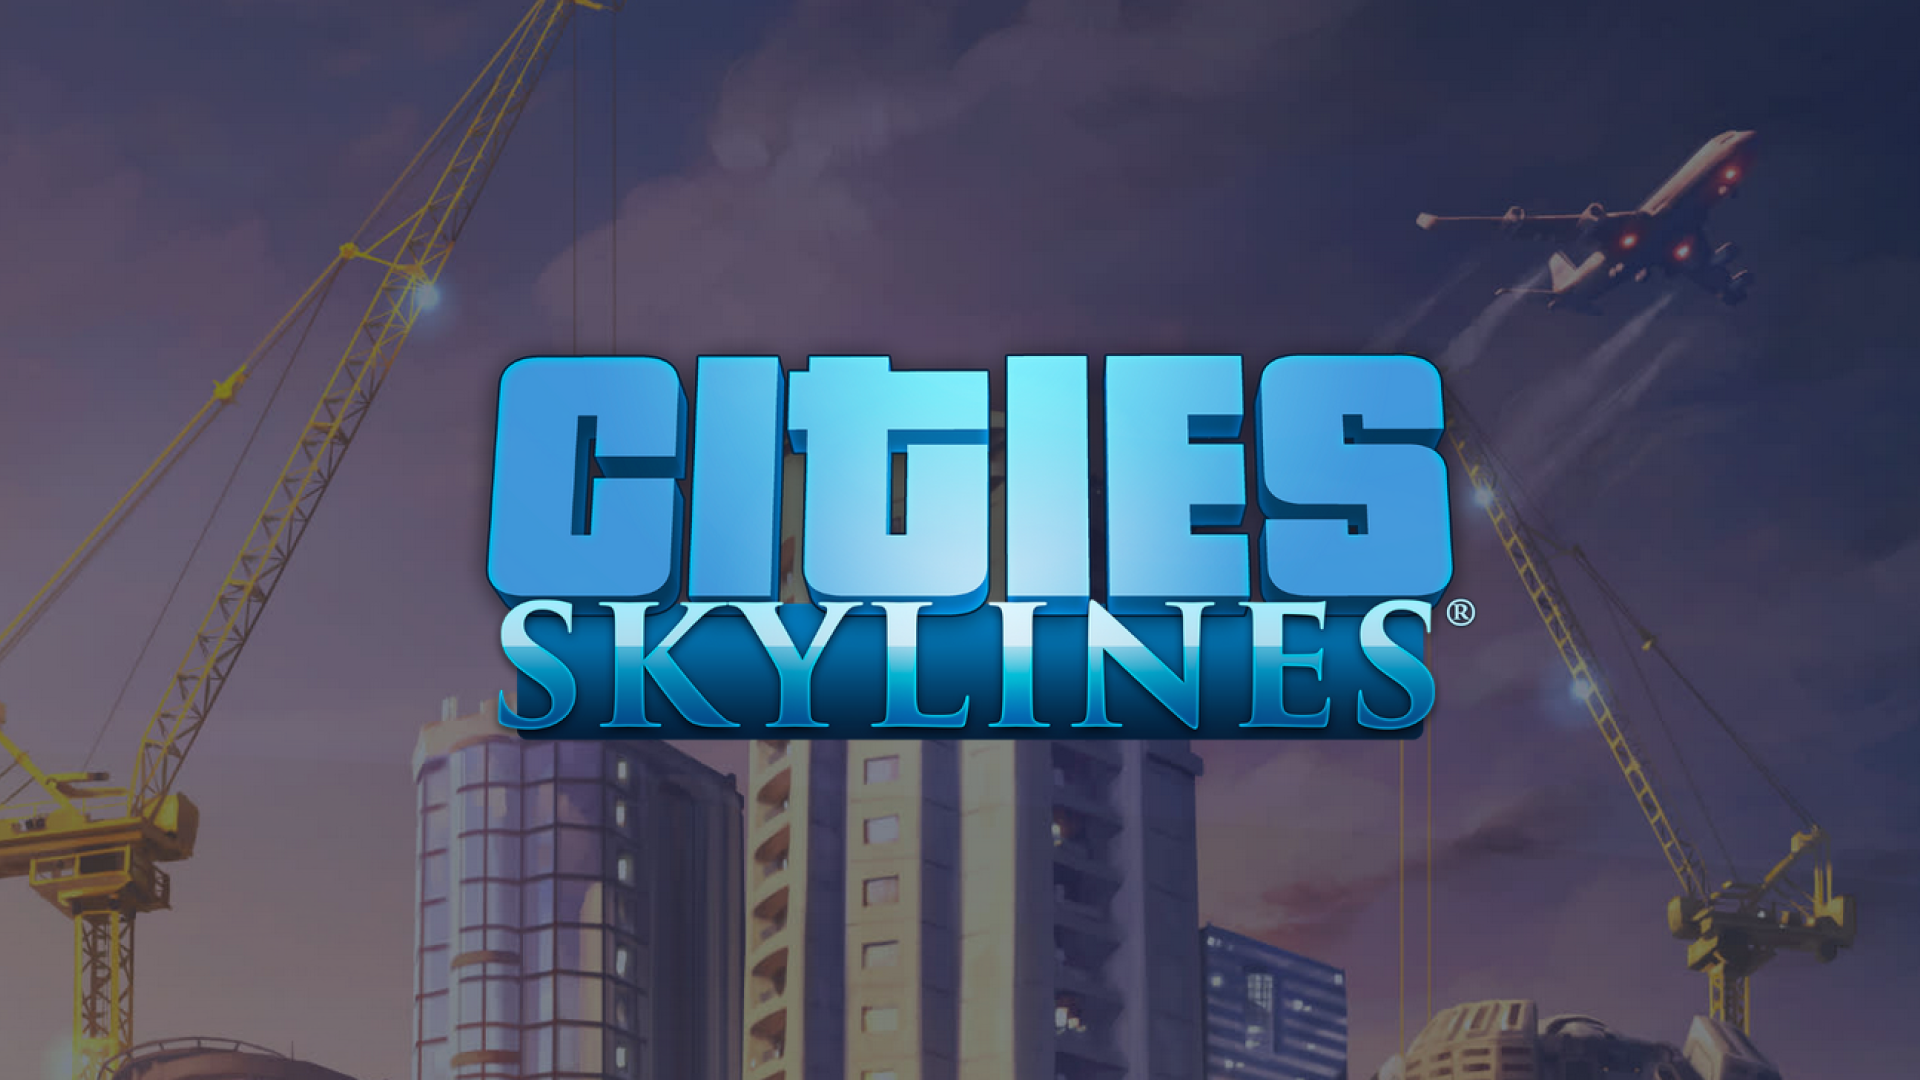 cities_title.png